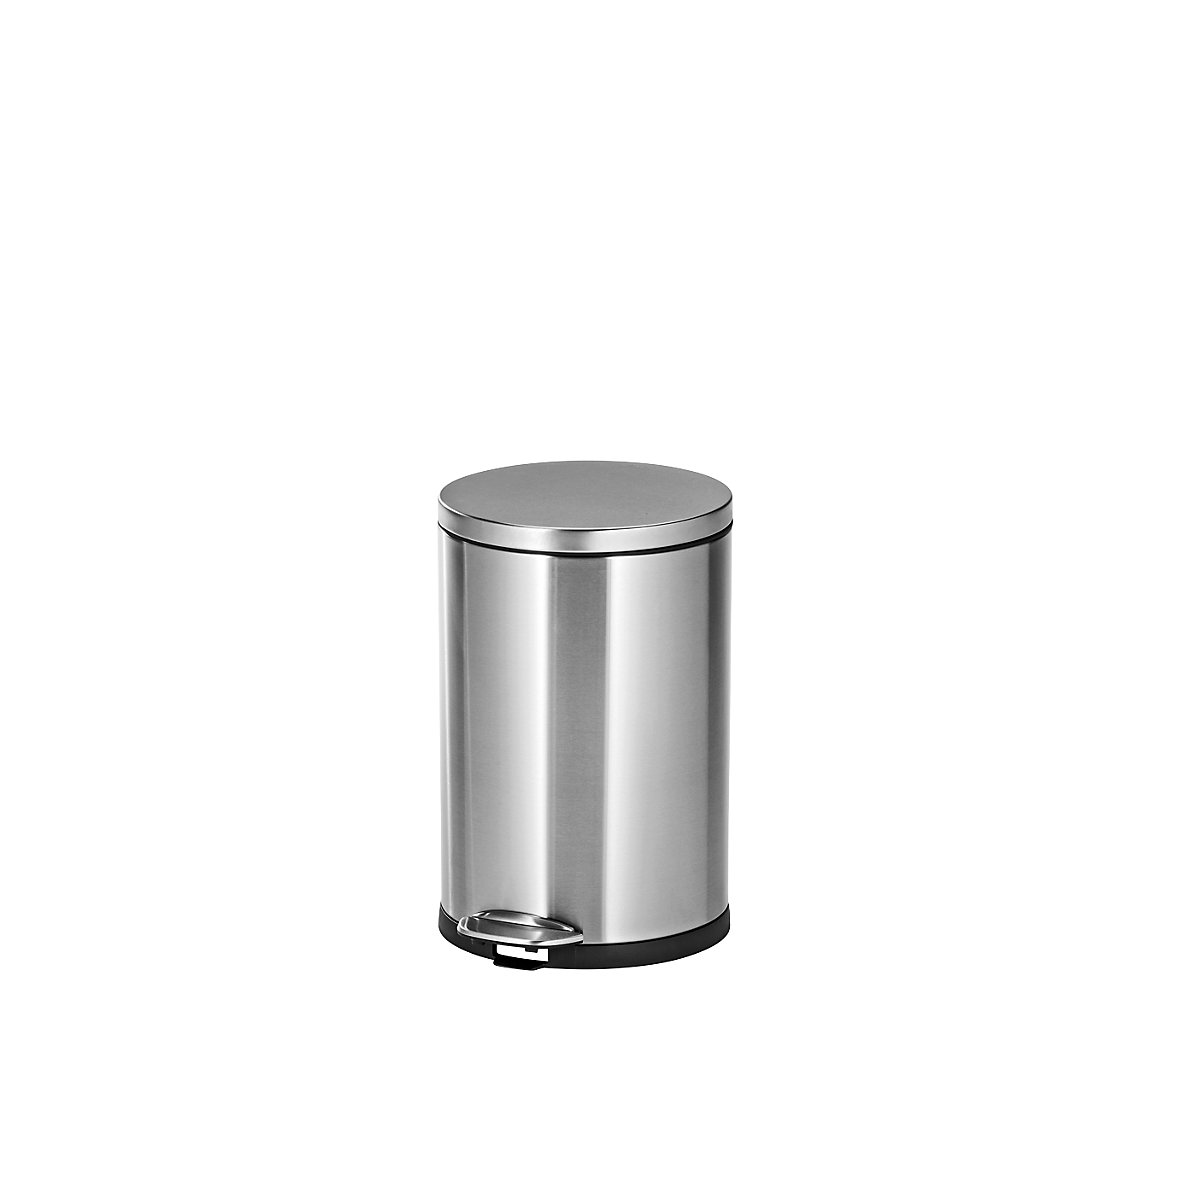 https://images.kkeu.de/is/image/BEG/Waste_systems/Waste_collectors/Stainless_steel_pedal_bin_round_pdplarge-mrd--000023485045_PRD_org_all.jpg